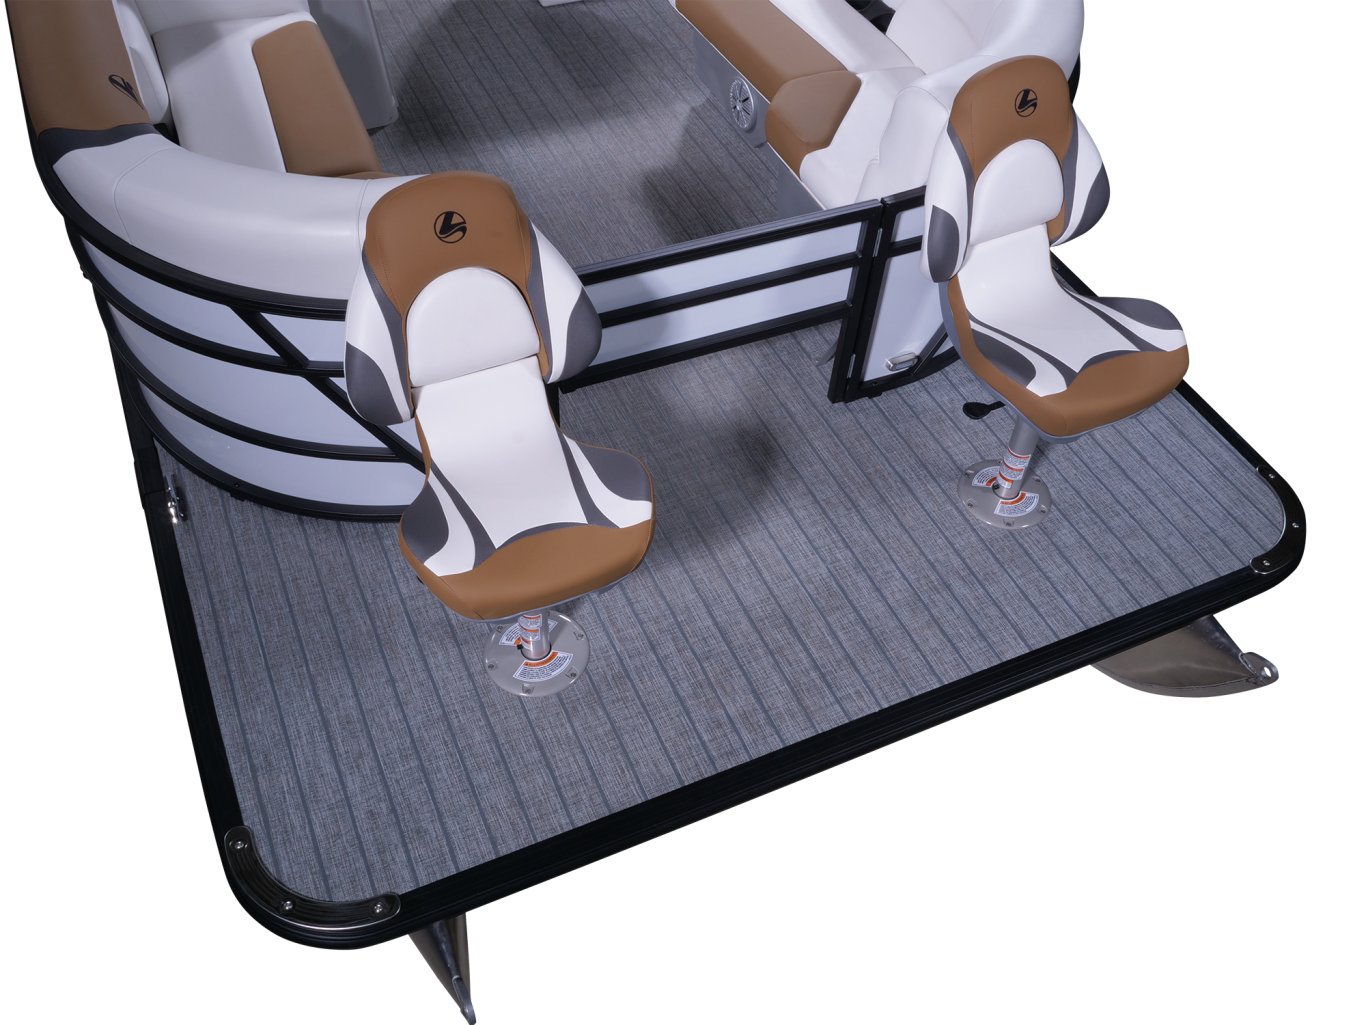 https://www.legendboats.com/wp-content/uploads/2021/01/e-series-cruise-ext-front-deck-chairs-copy.png